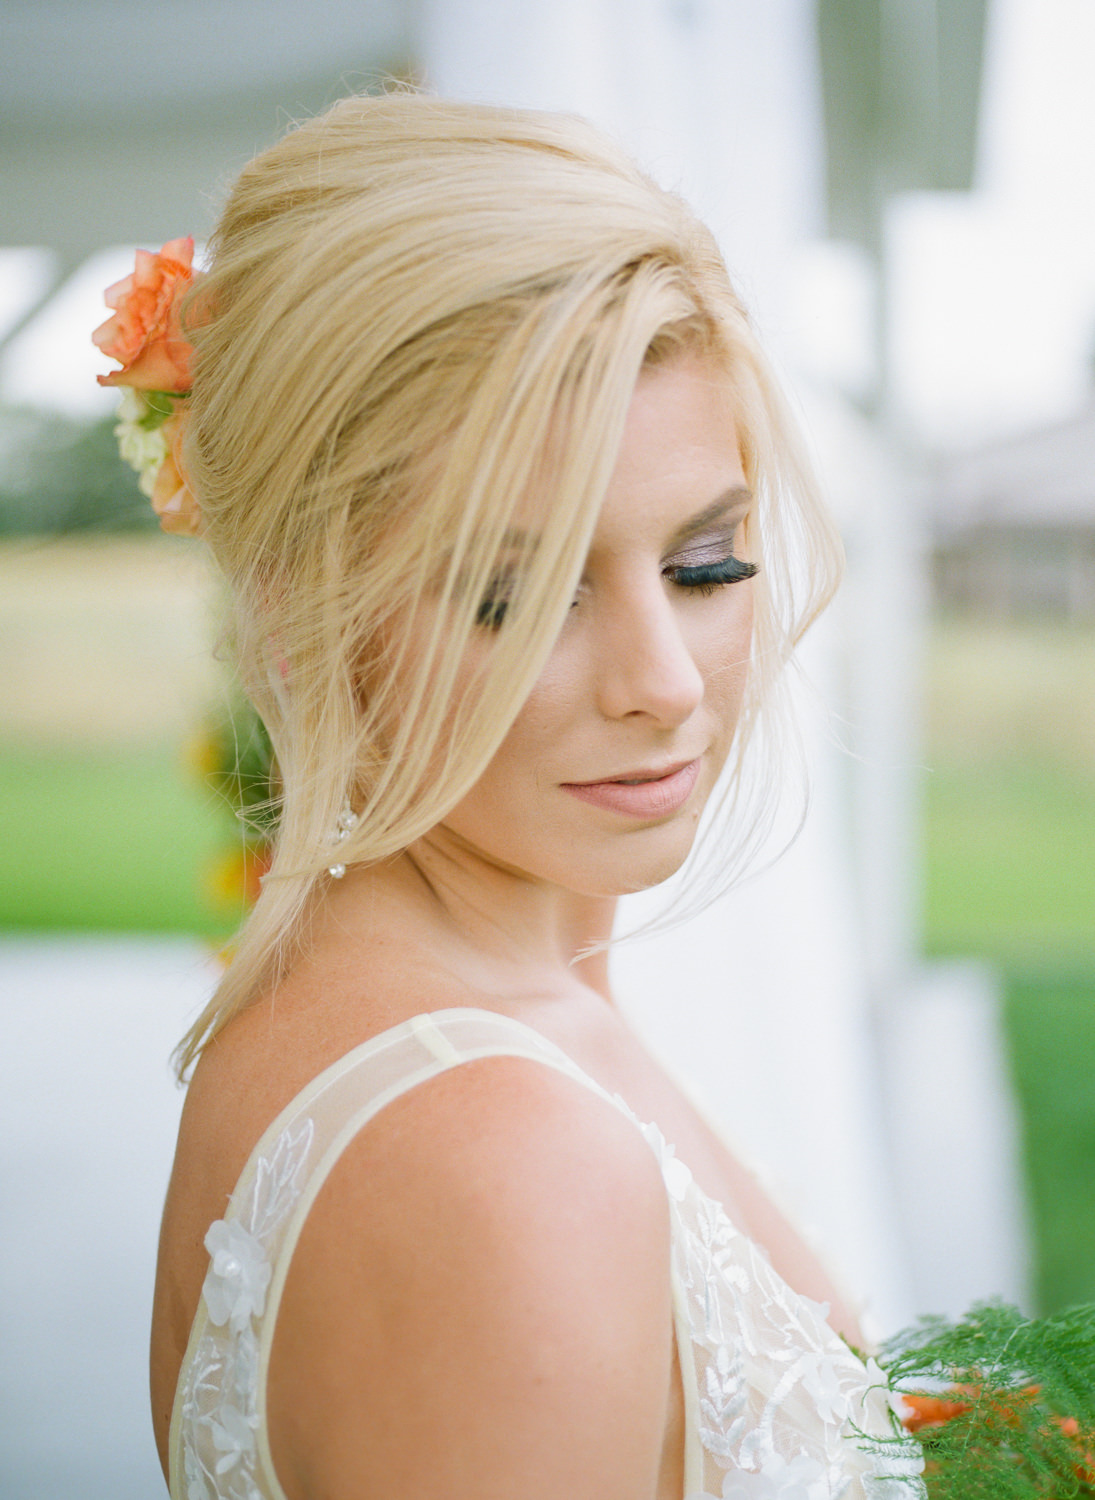 Bridal hair with brightly colored flowers; St. Louis fine art film wedding photographer Erica Robnett Photography